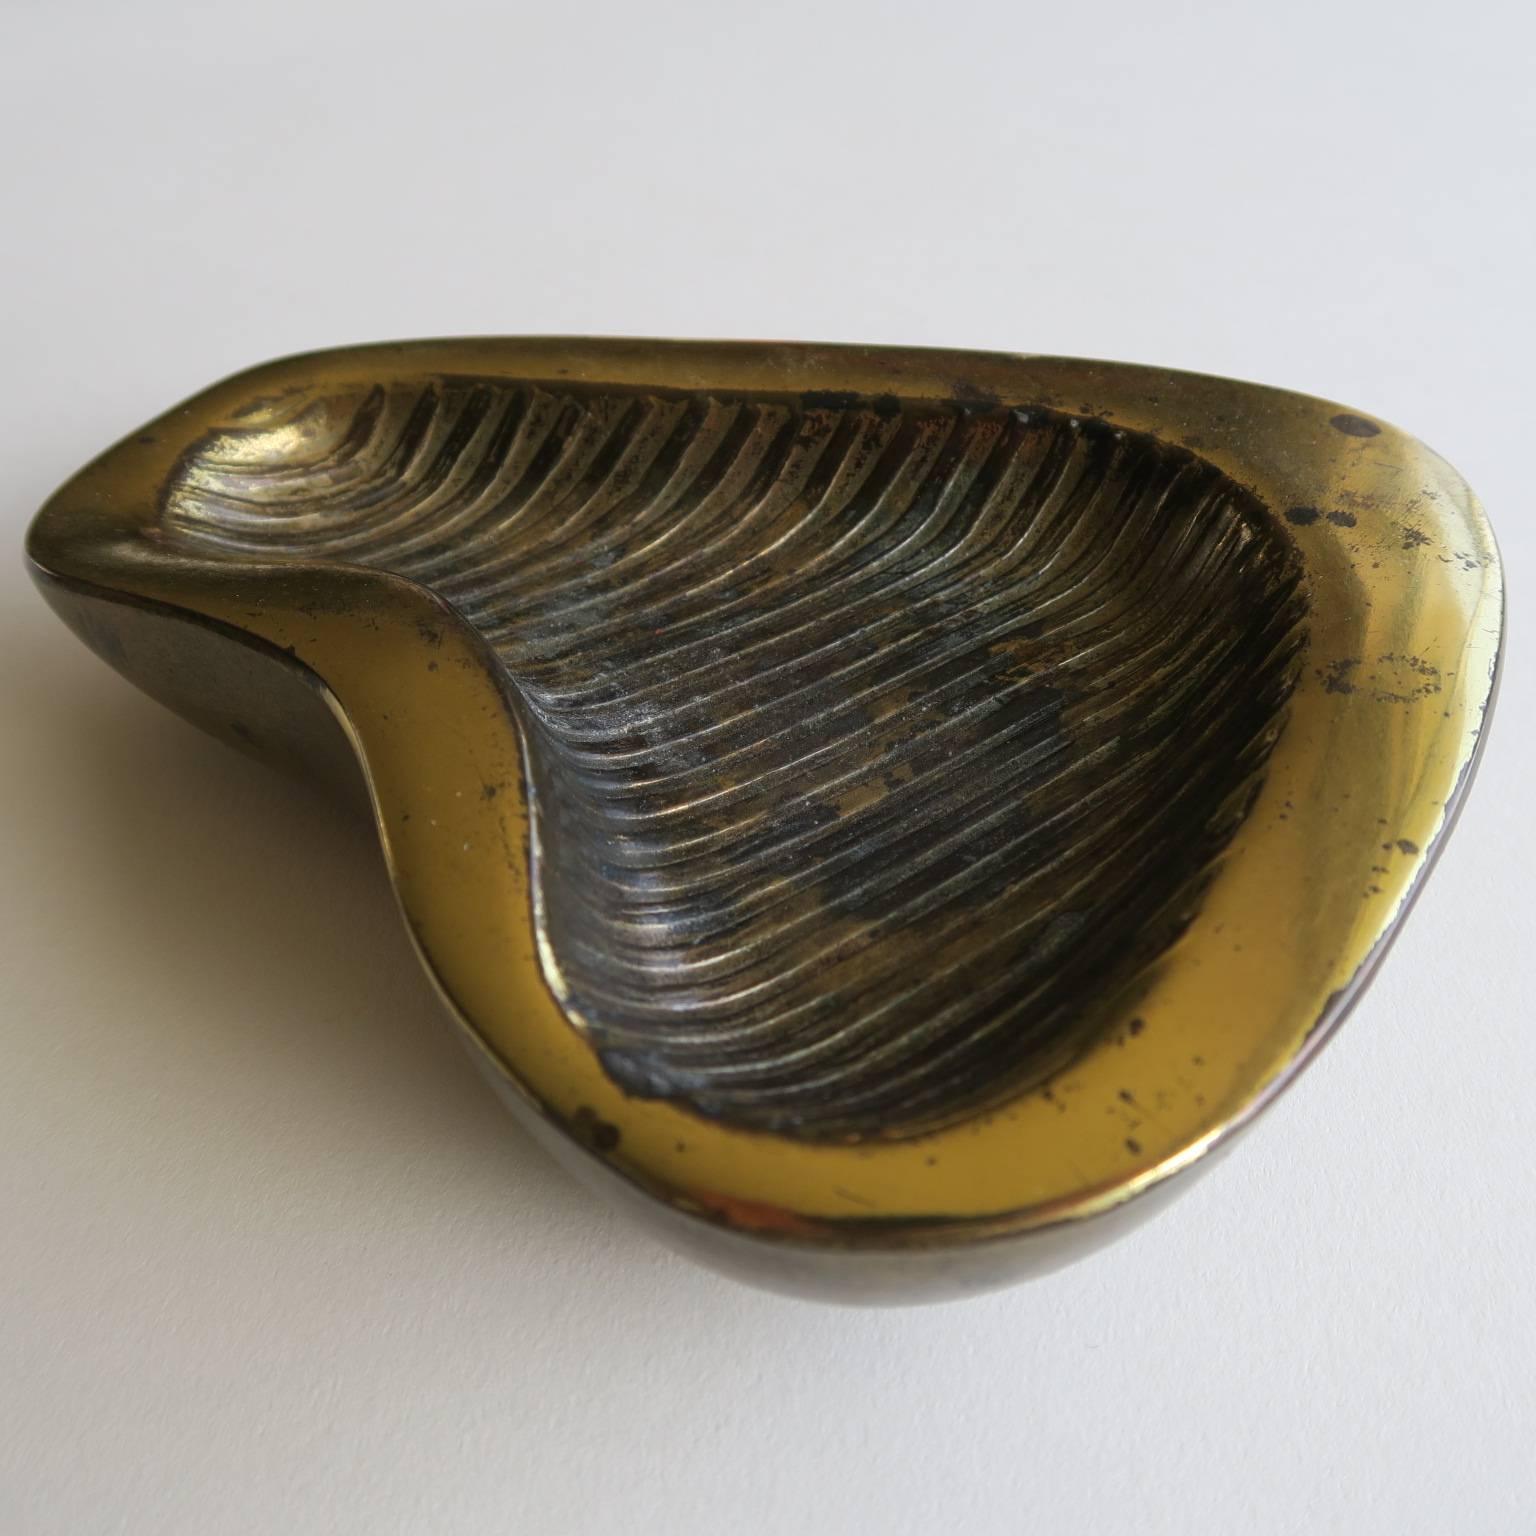 Ben Seibel dish with lines design, brass plated cast metal, originally designed for use as an ashtray, decorative and functional, circa late 1950s, 1 1/4 high x 5 3/4 wide x 4 1/2 deep inches.